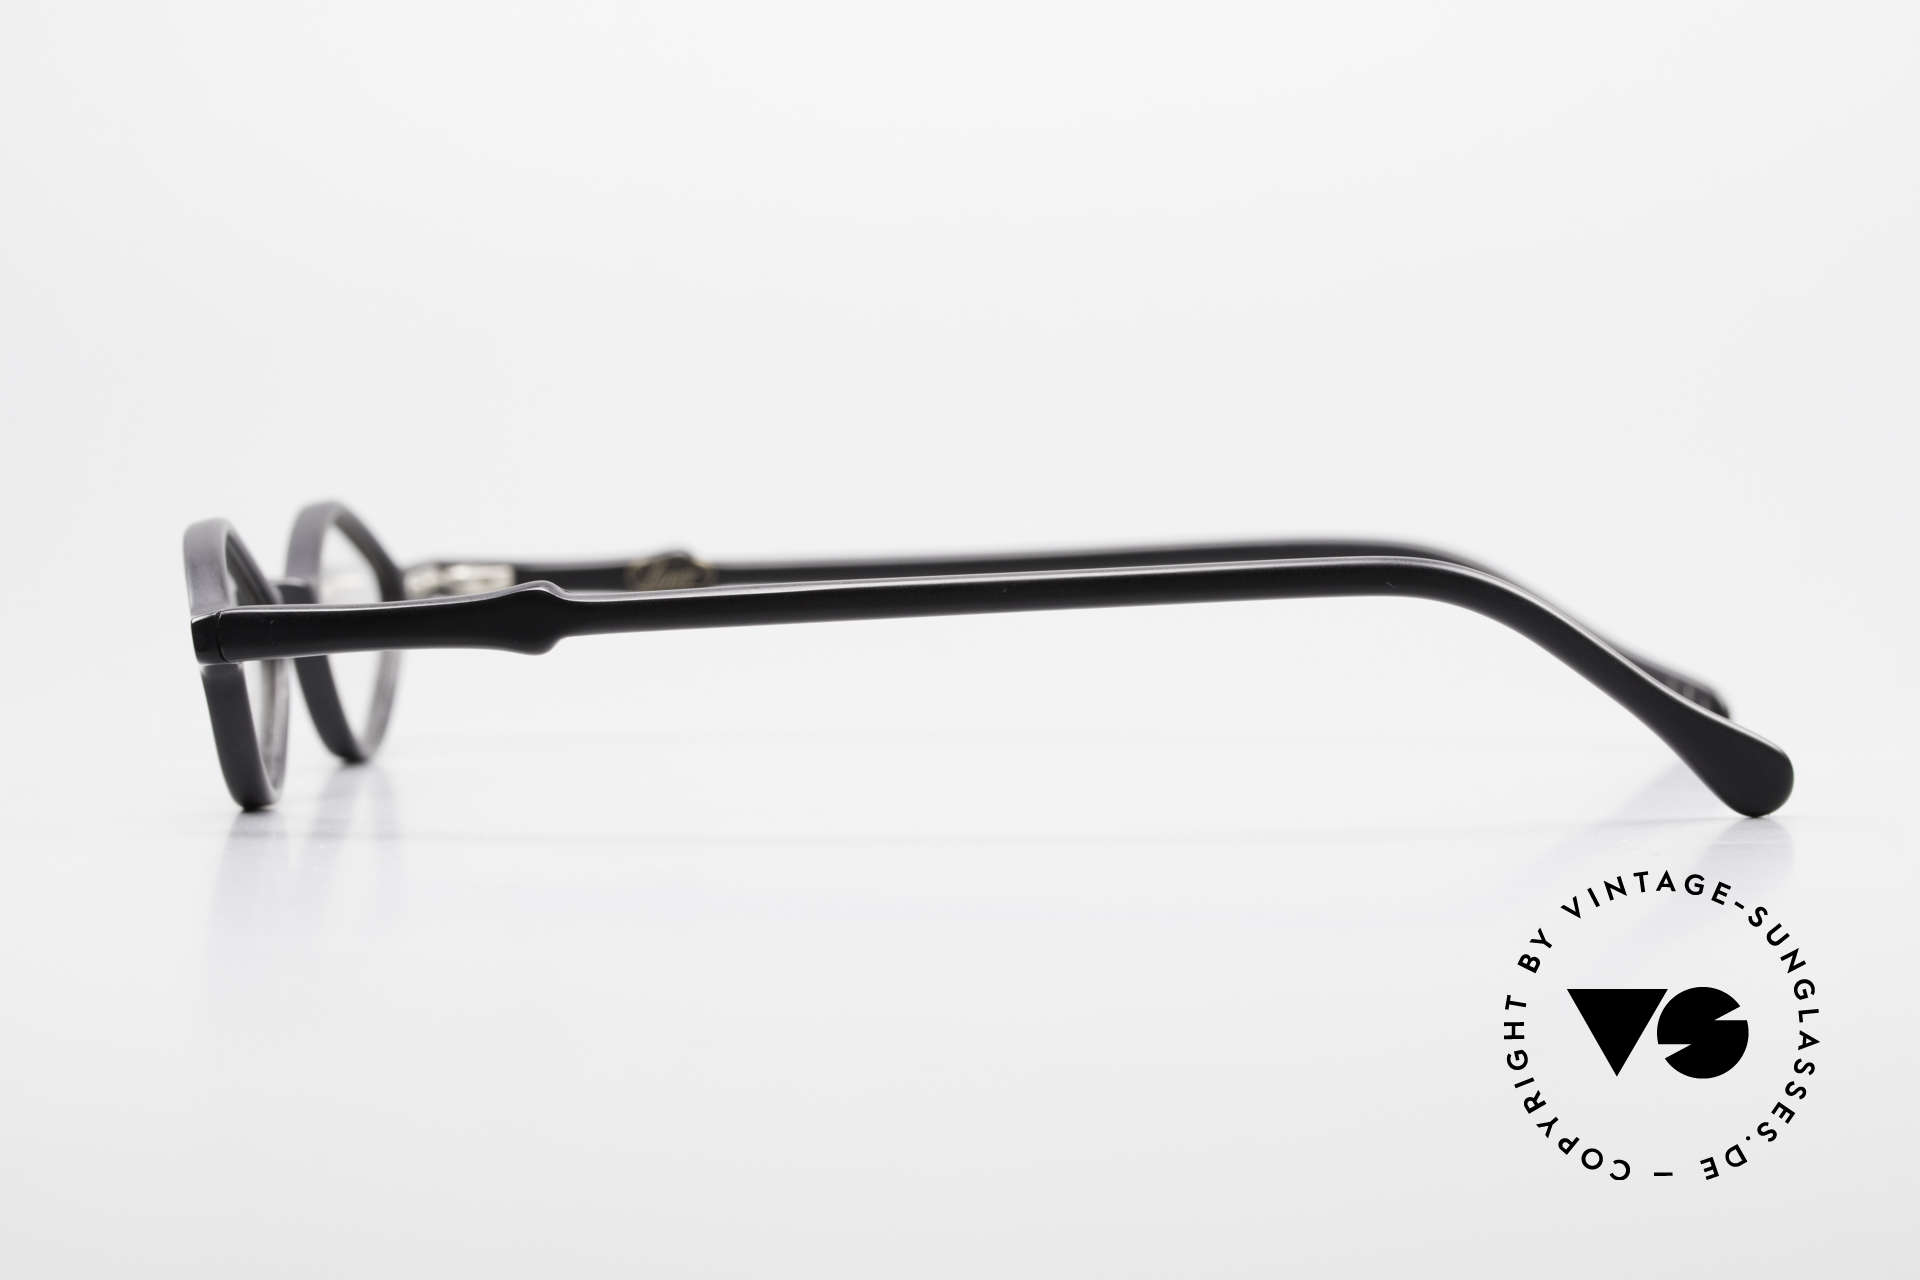 Lunor A44 Reading Glasses Acetate Frame, the DEMO lenses should be replaced with prescriptions, Made for Men and Women